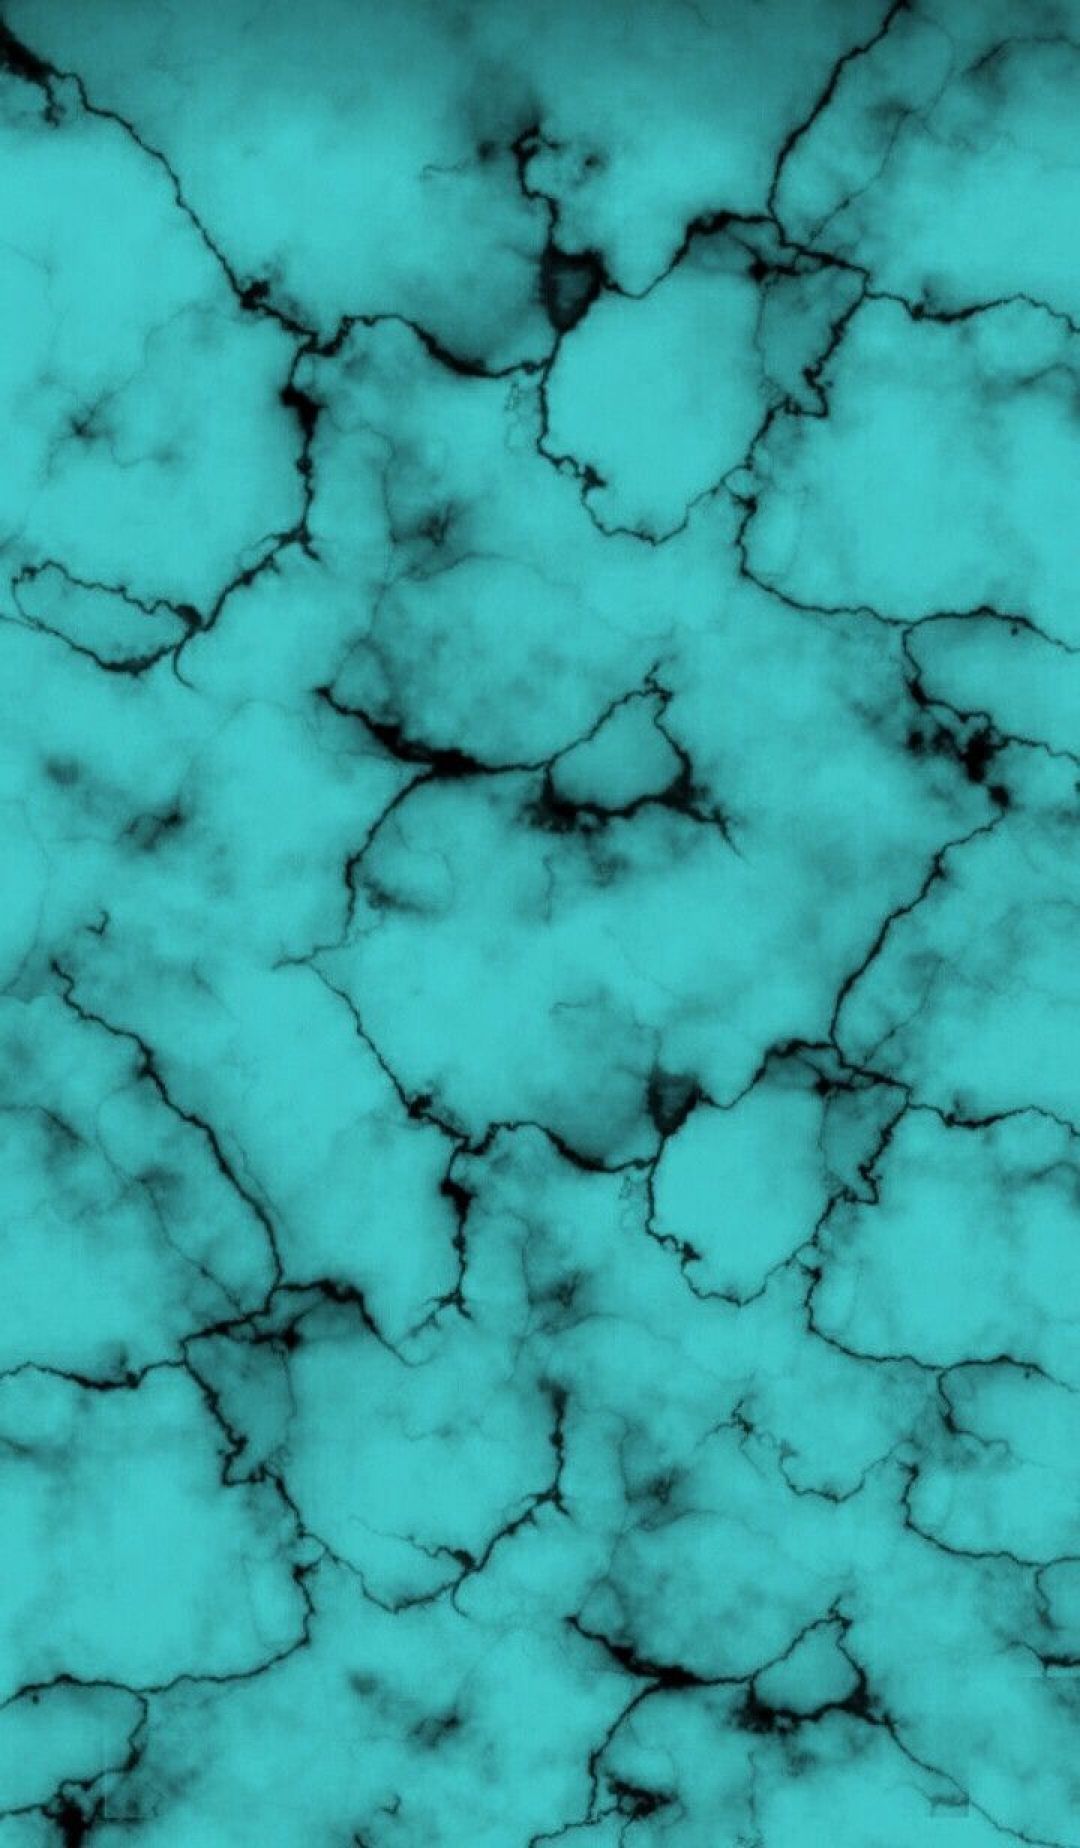 Creative Graphics Image HD Photo 1080p Wallpaper Android iPhone 2020 3490 Creativ. Blue wallpaper iphone, Marble wallpaper phone, Teal marble wallpaper